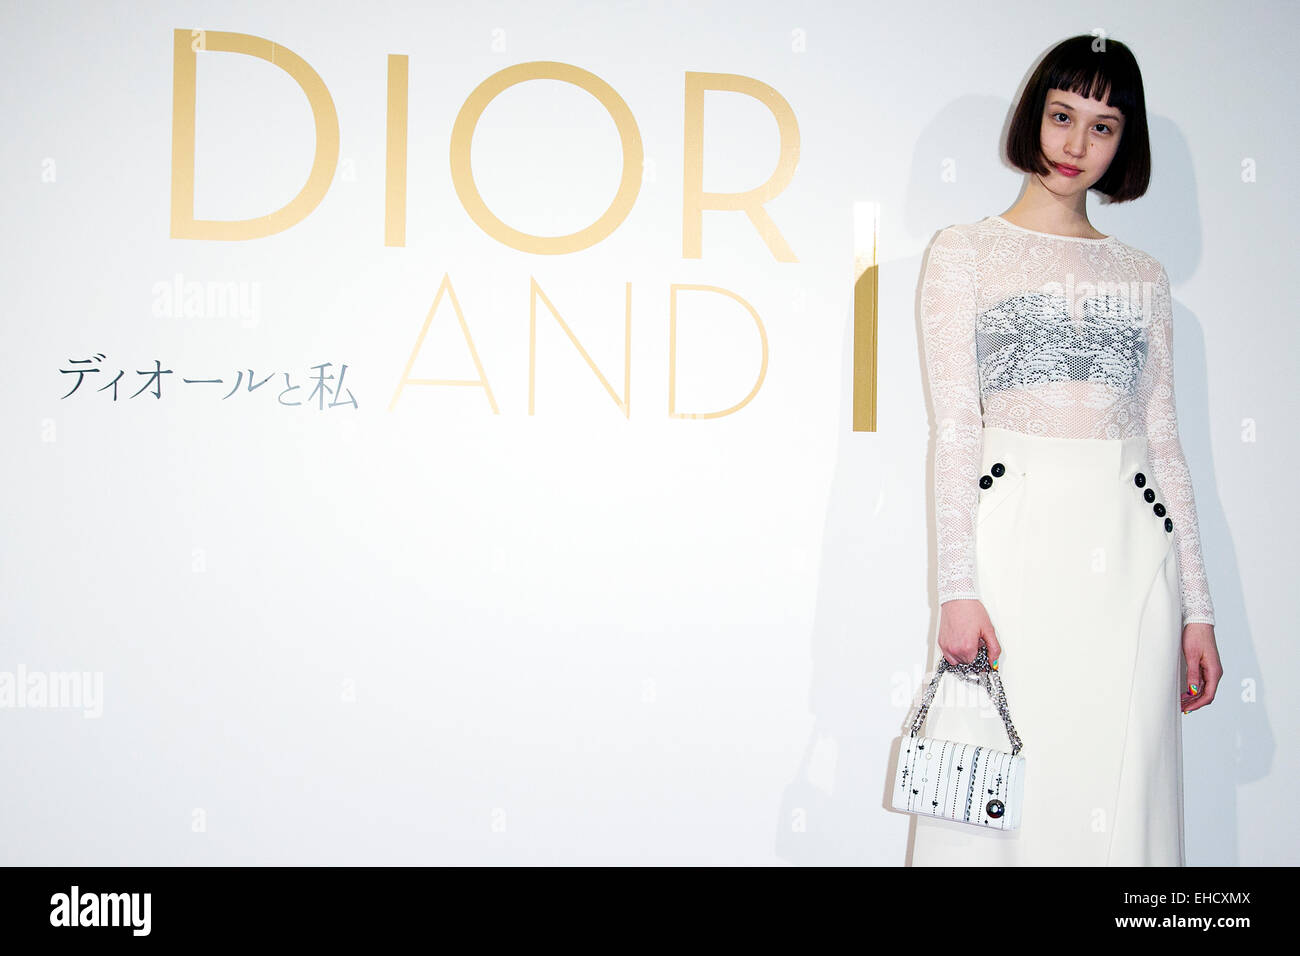 [Image: dior-and-i-movie-special-talk-show-on-ma...EHCXMX.jpg]